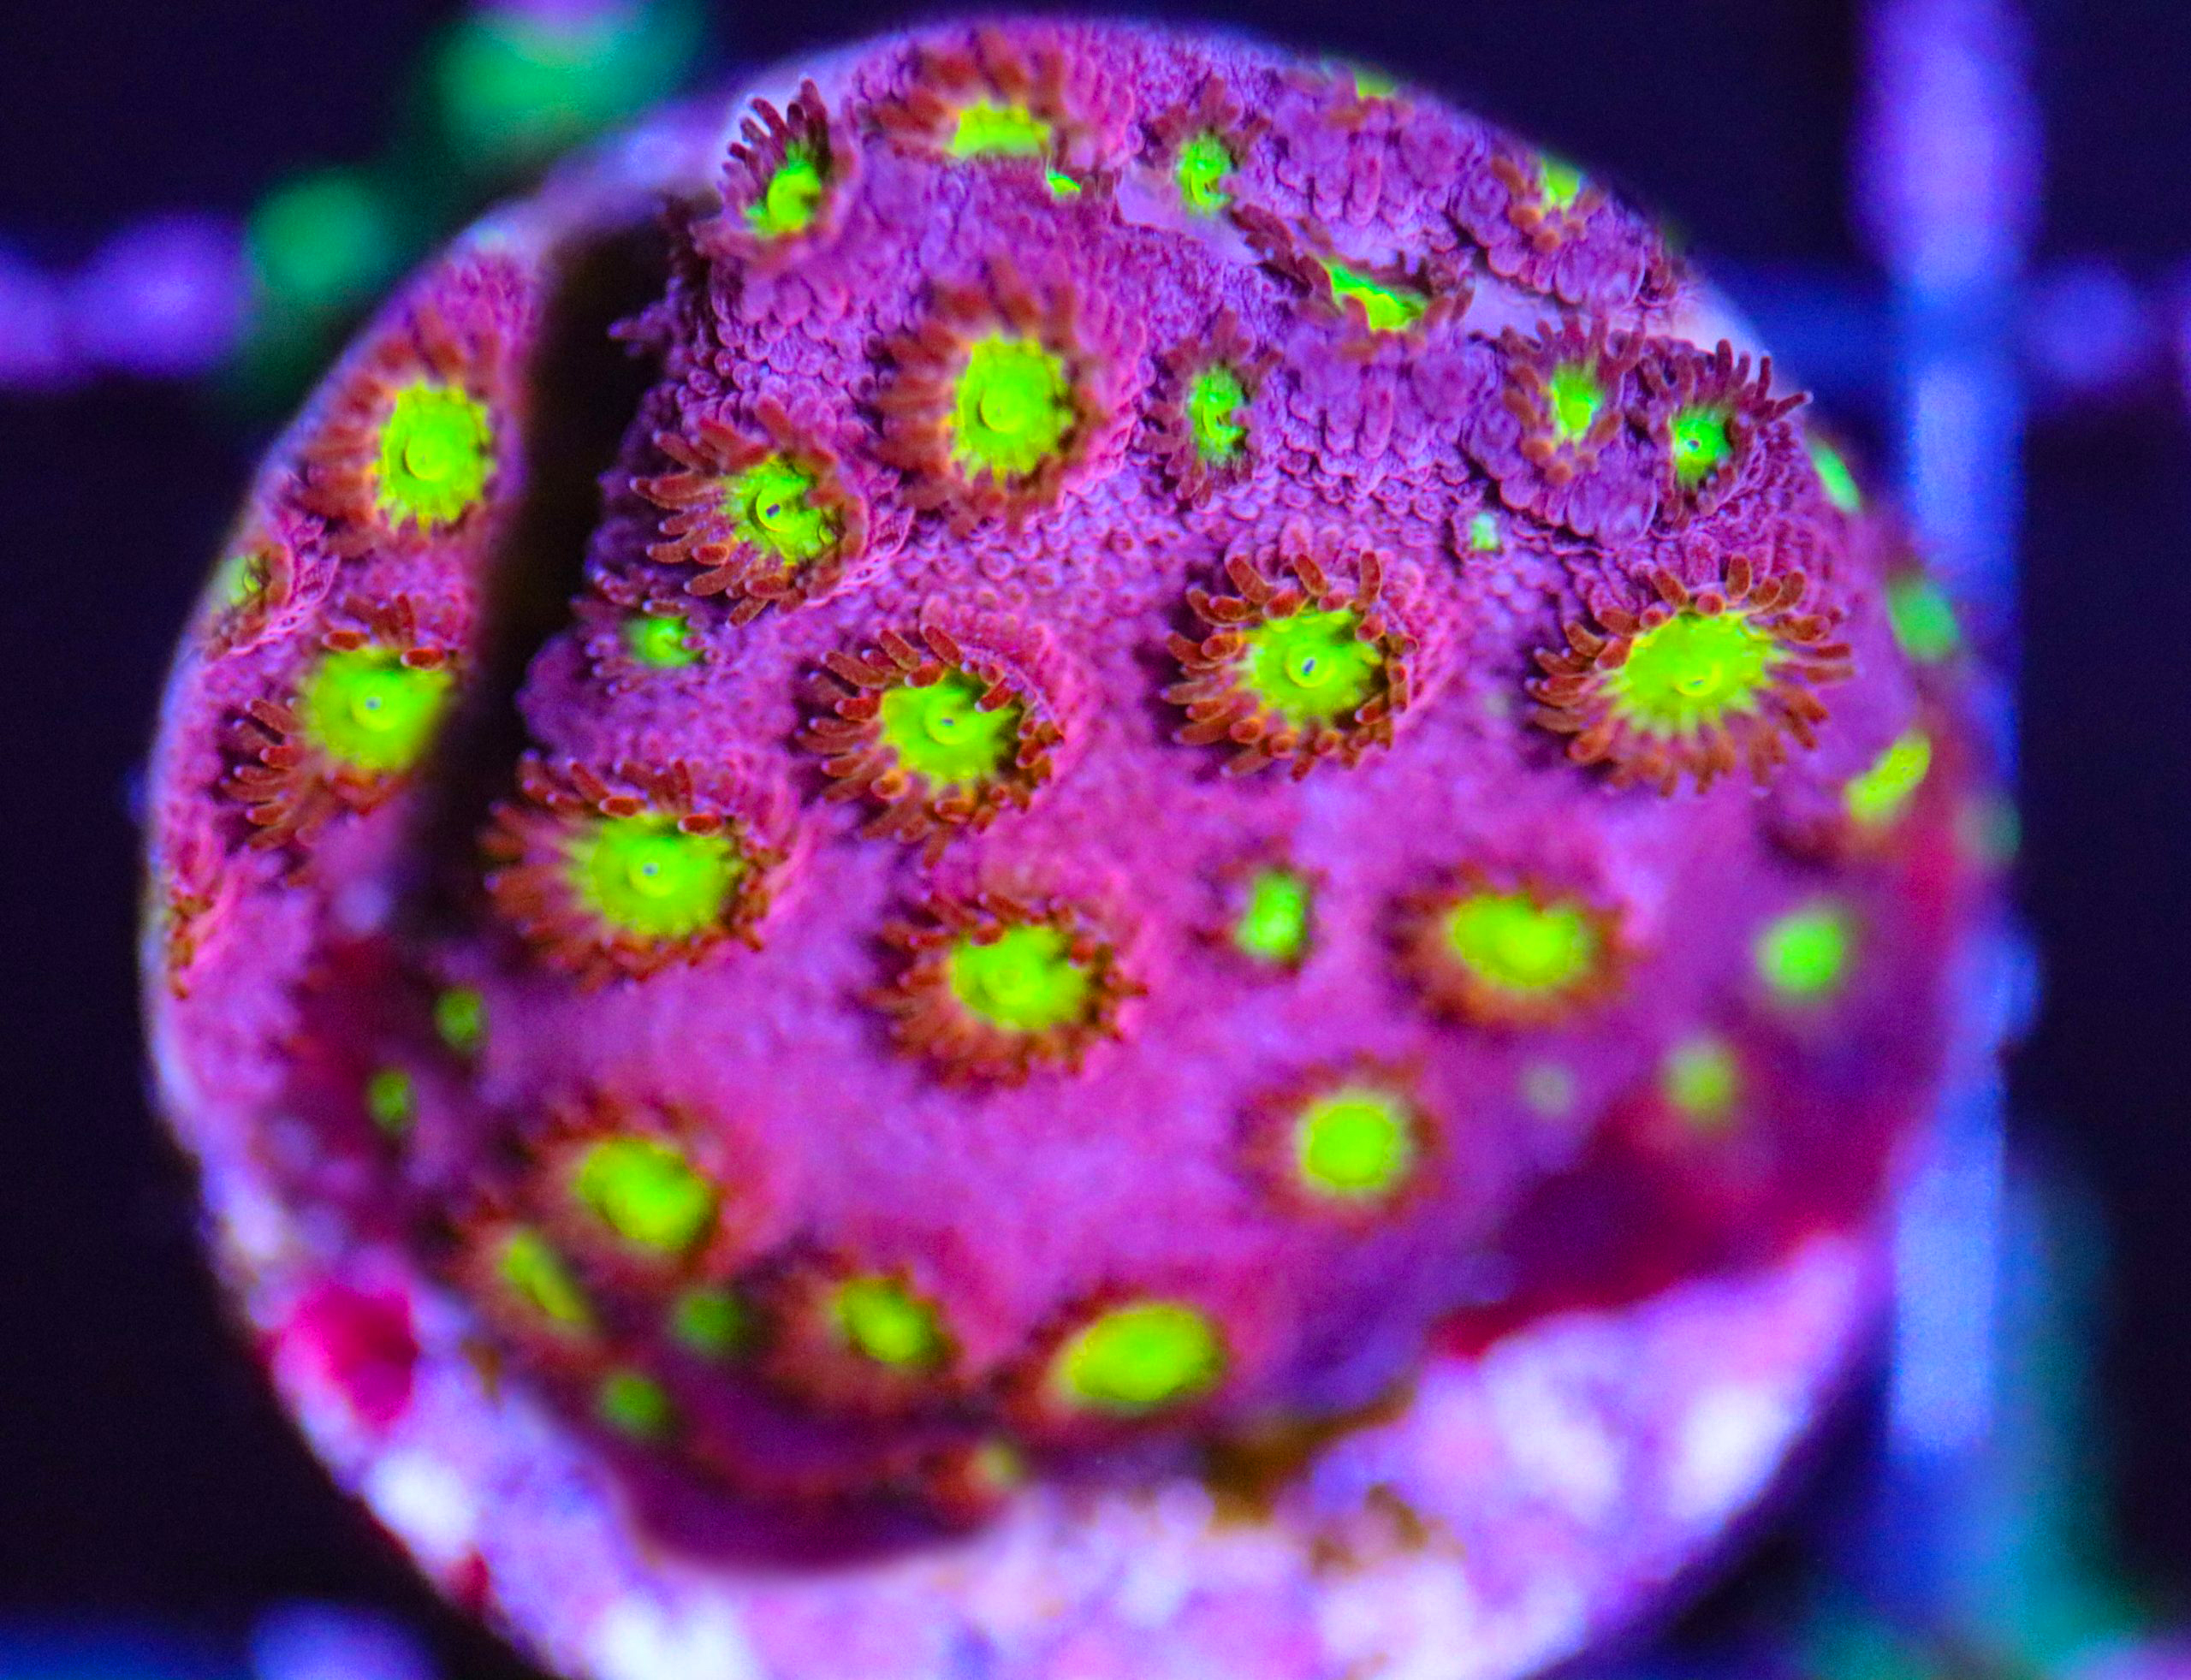 JF Bling Bling Cyphastrea - Frag Box Corals